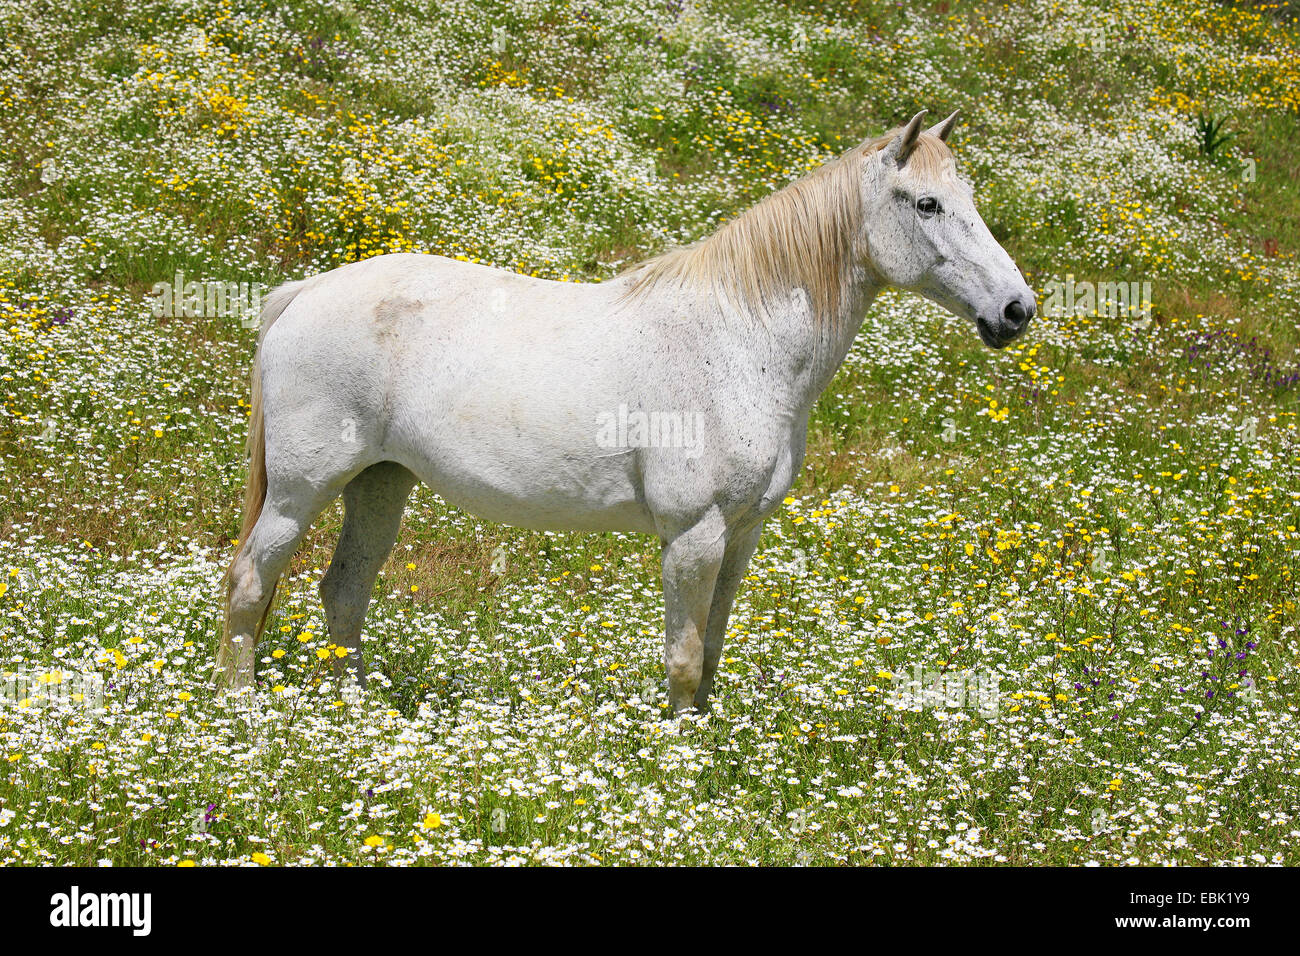 Lusitanian horse (Equus przewalskii f. caballus), white horse standing in a flower meadow, Portugal Stock Photo